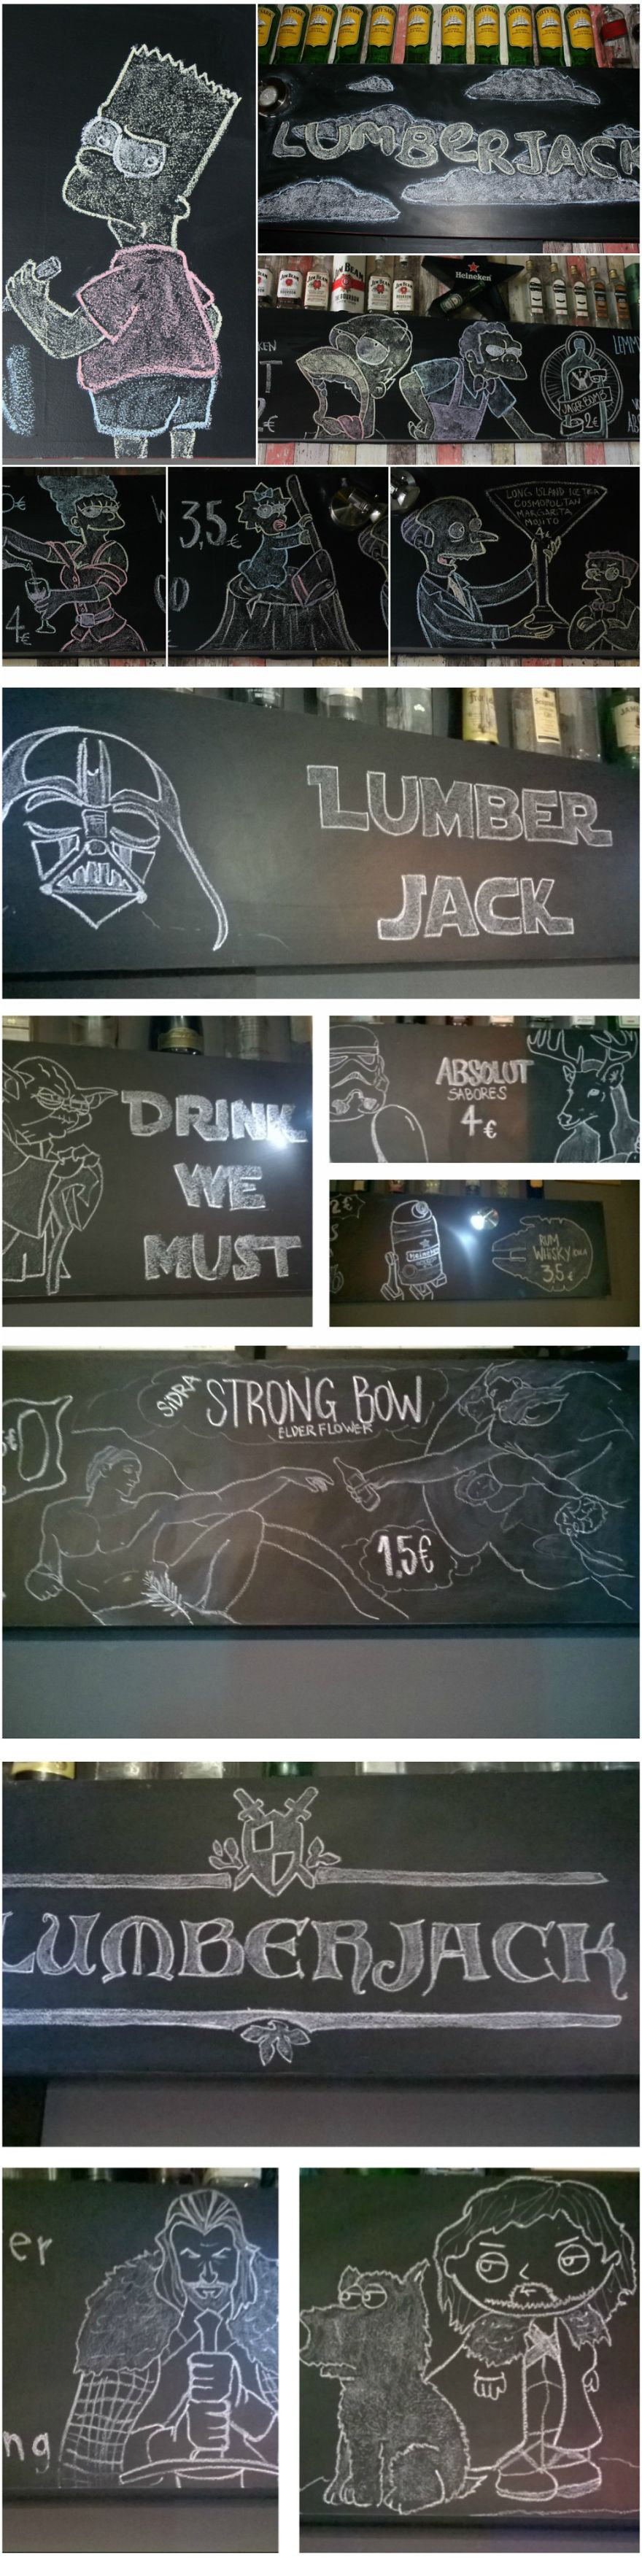 A Local Pub In My Hometown Has Some Incredible Chalkboard Art